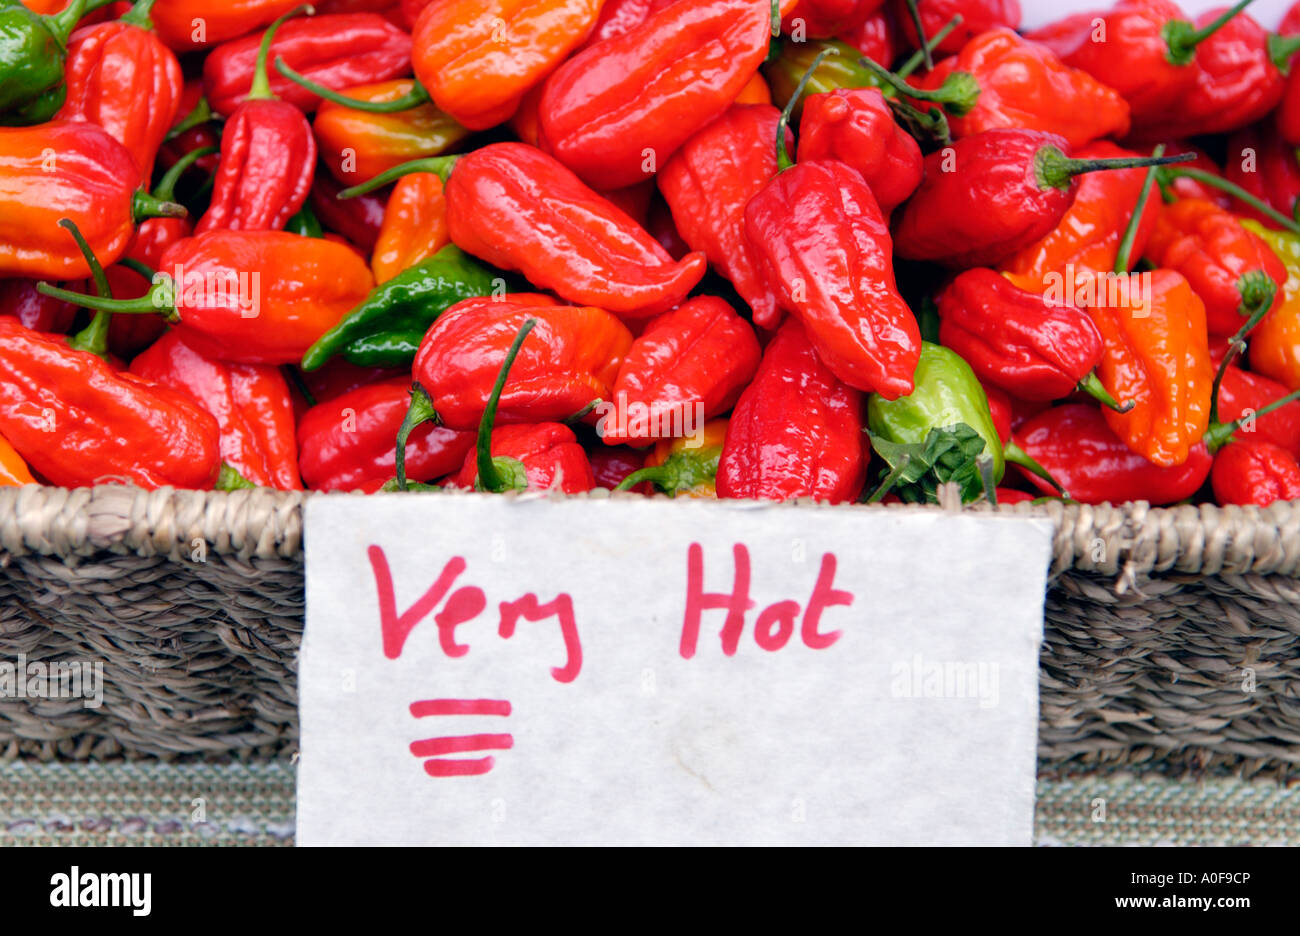 The worlds hottest chilli the DORSET NAGA on sale at the annual Abergavenny Food Festival Wales UK GB EU Stock Photo